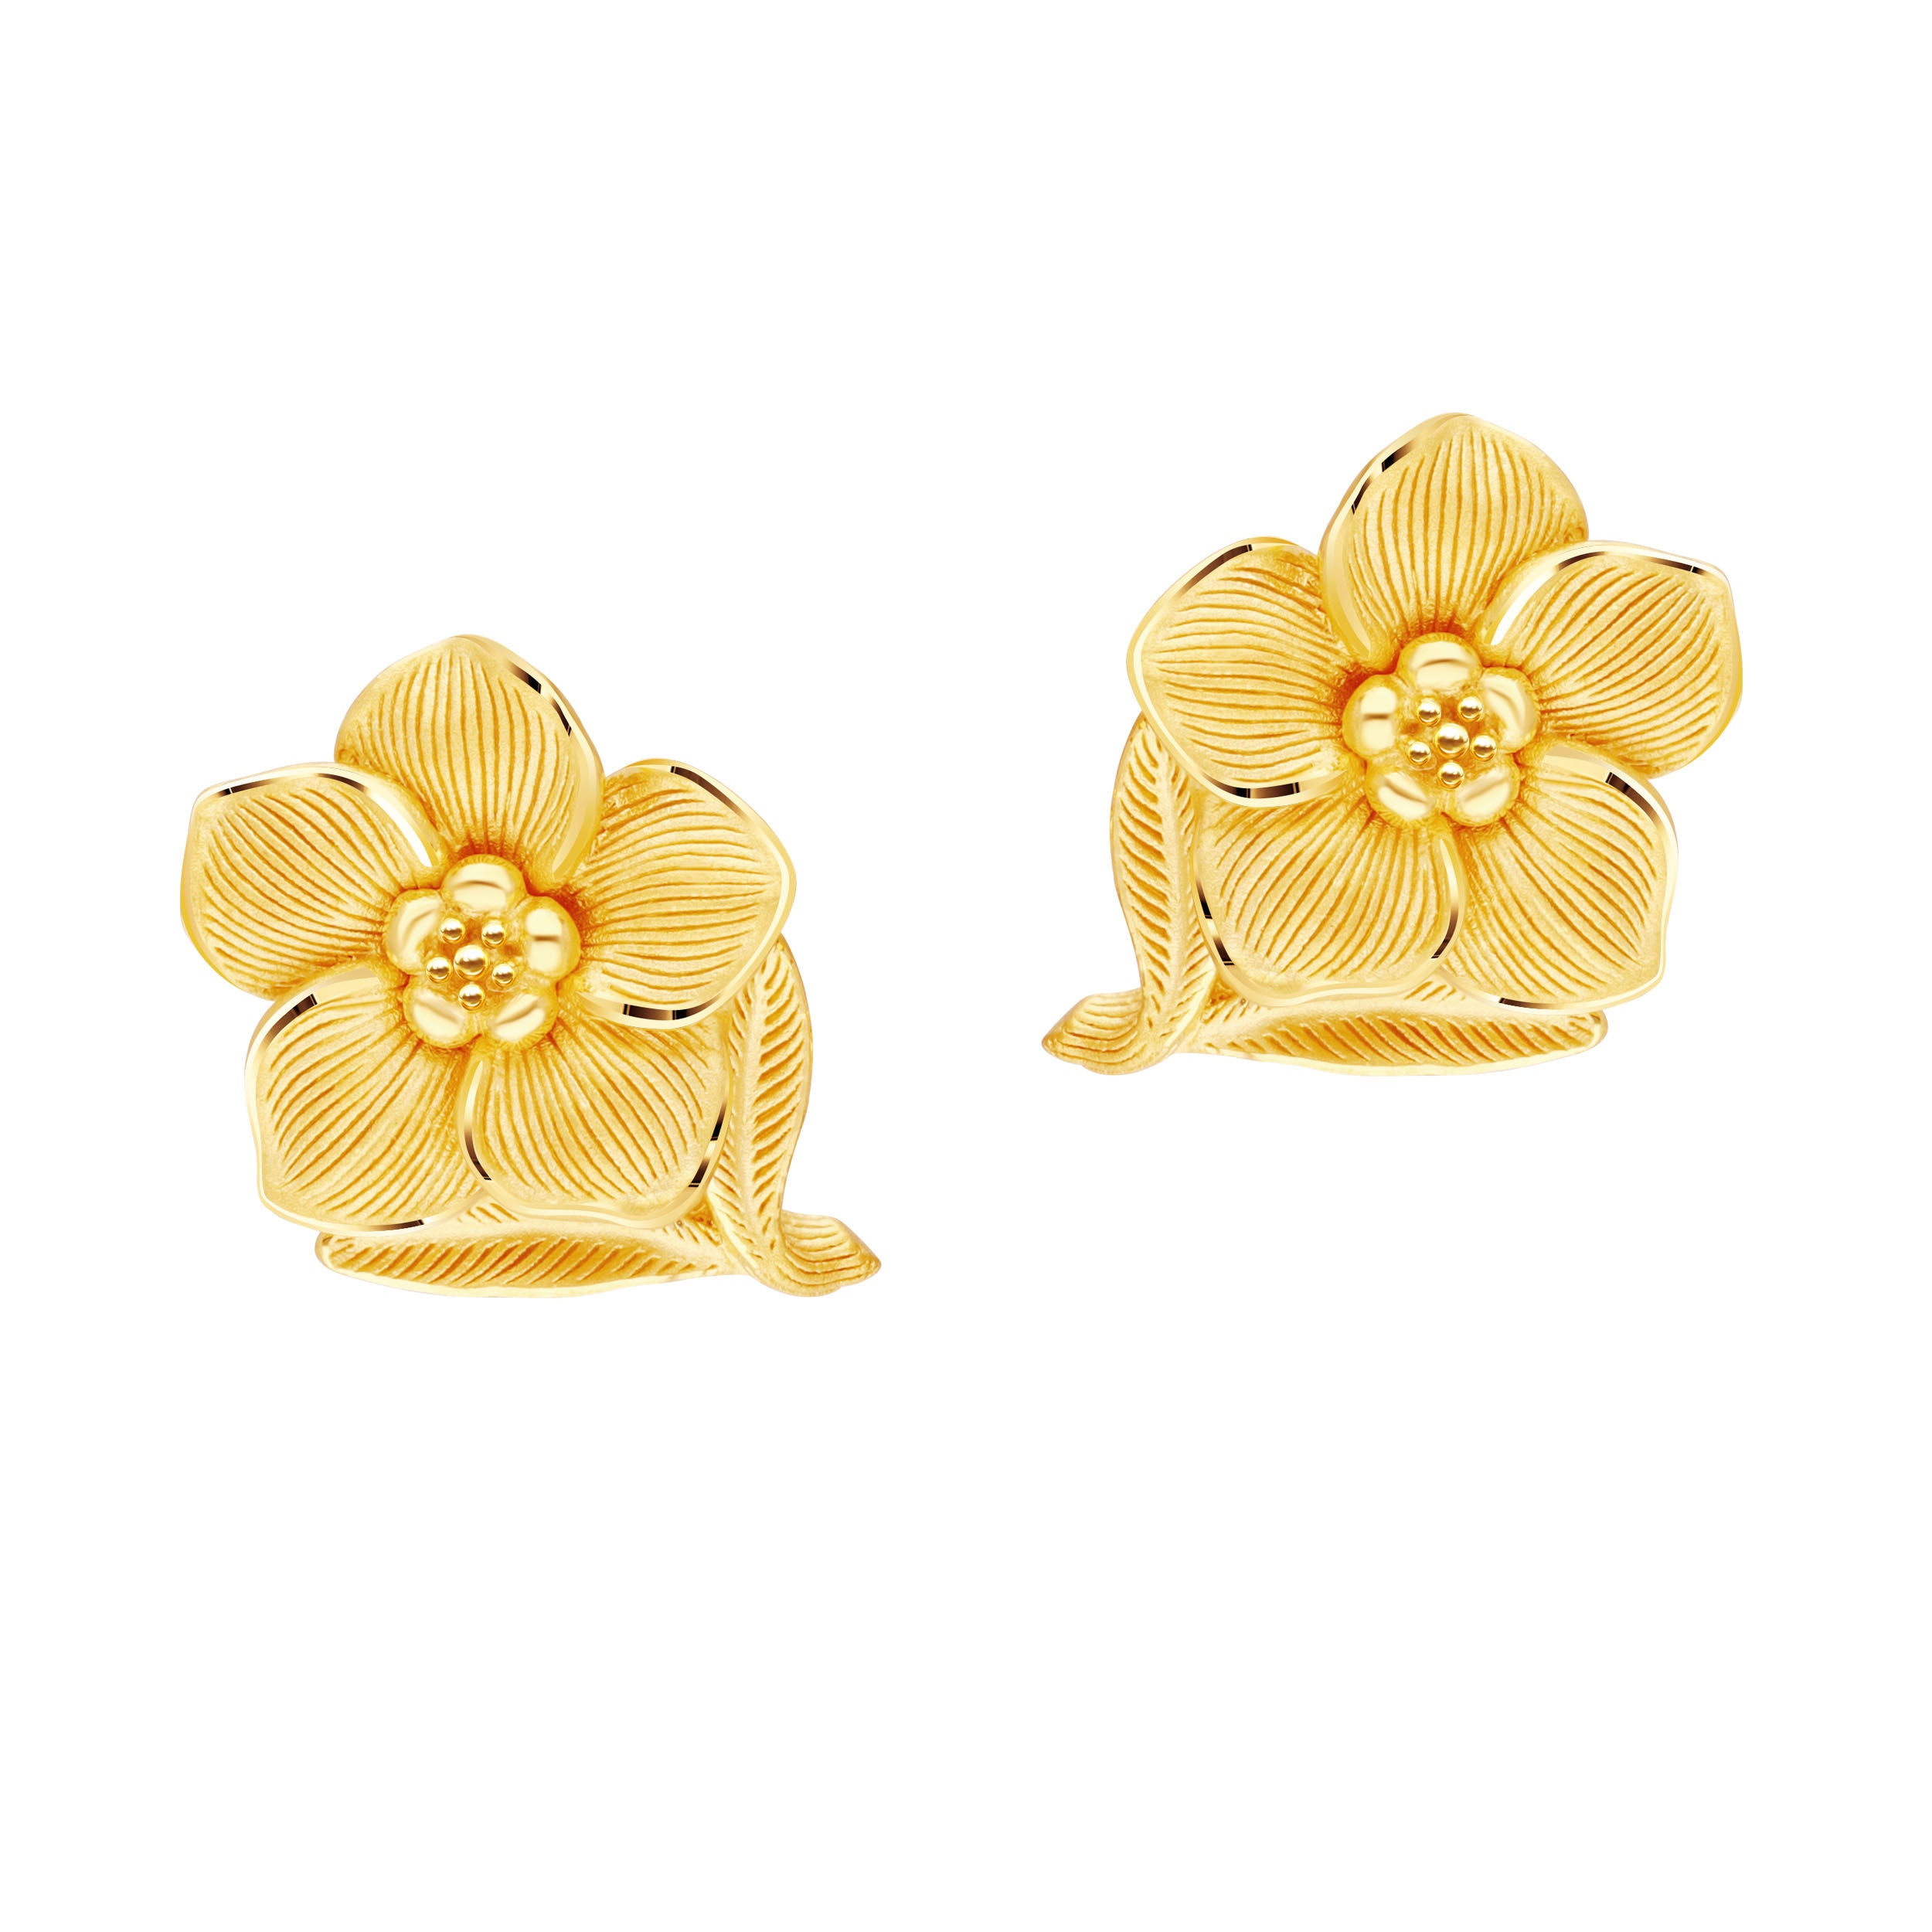 Details more than 193 malabar gold small earrings